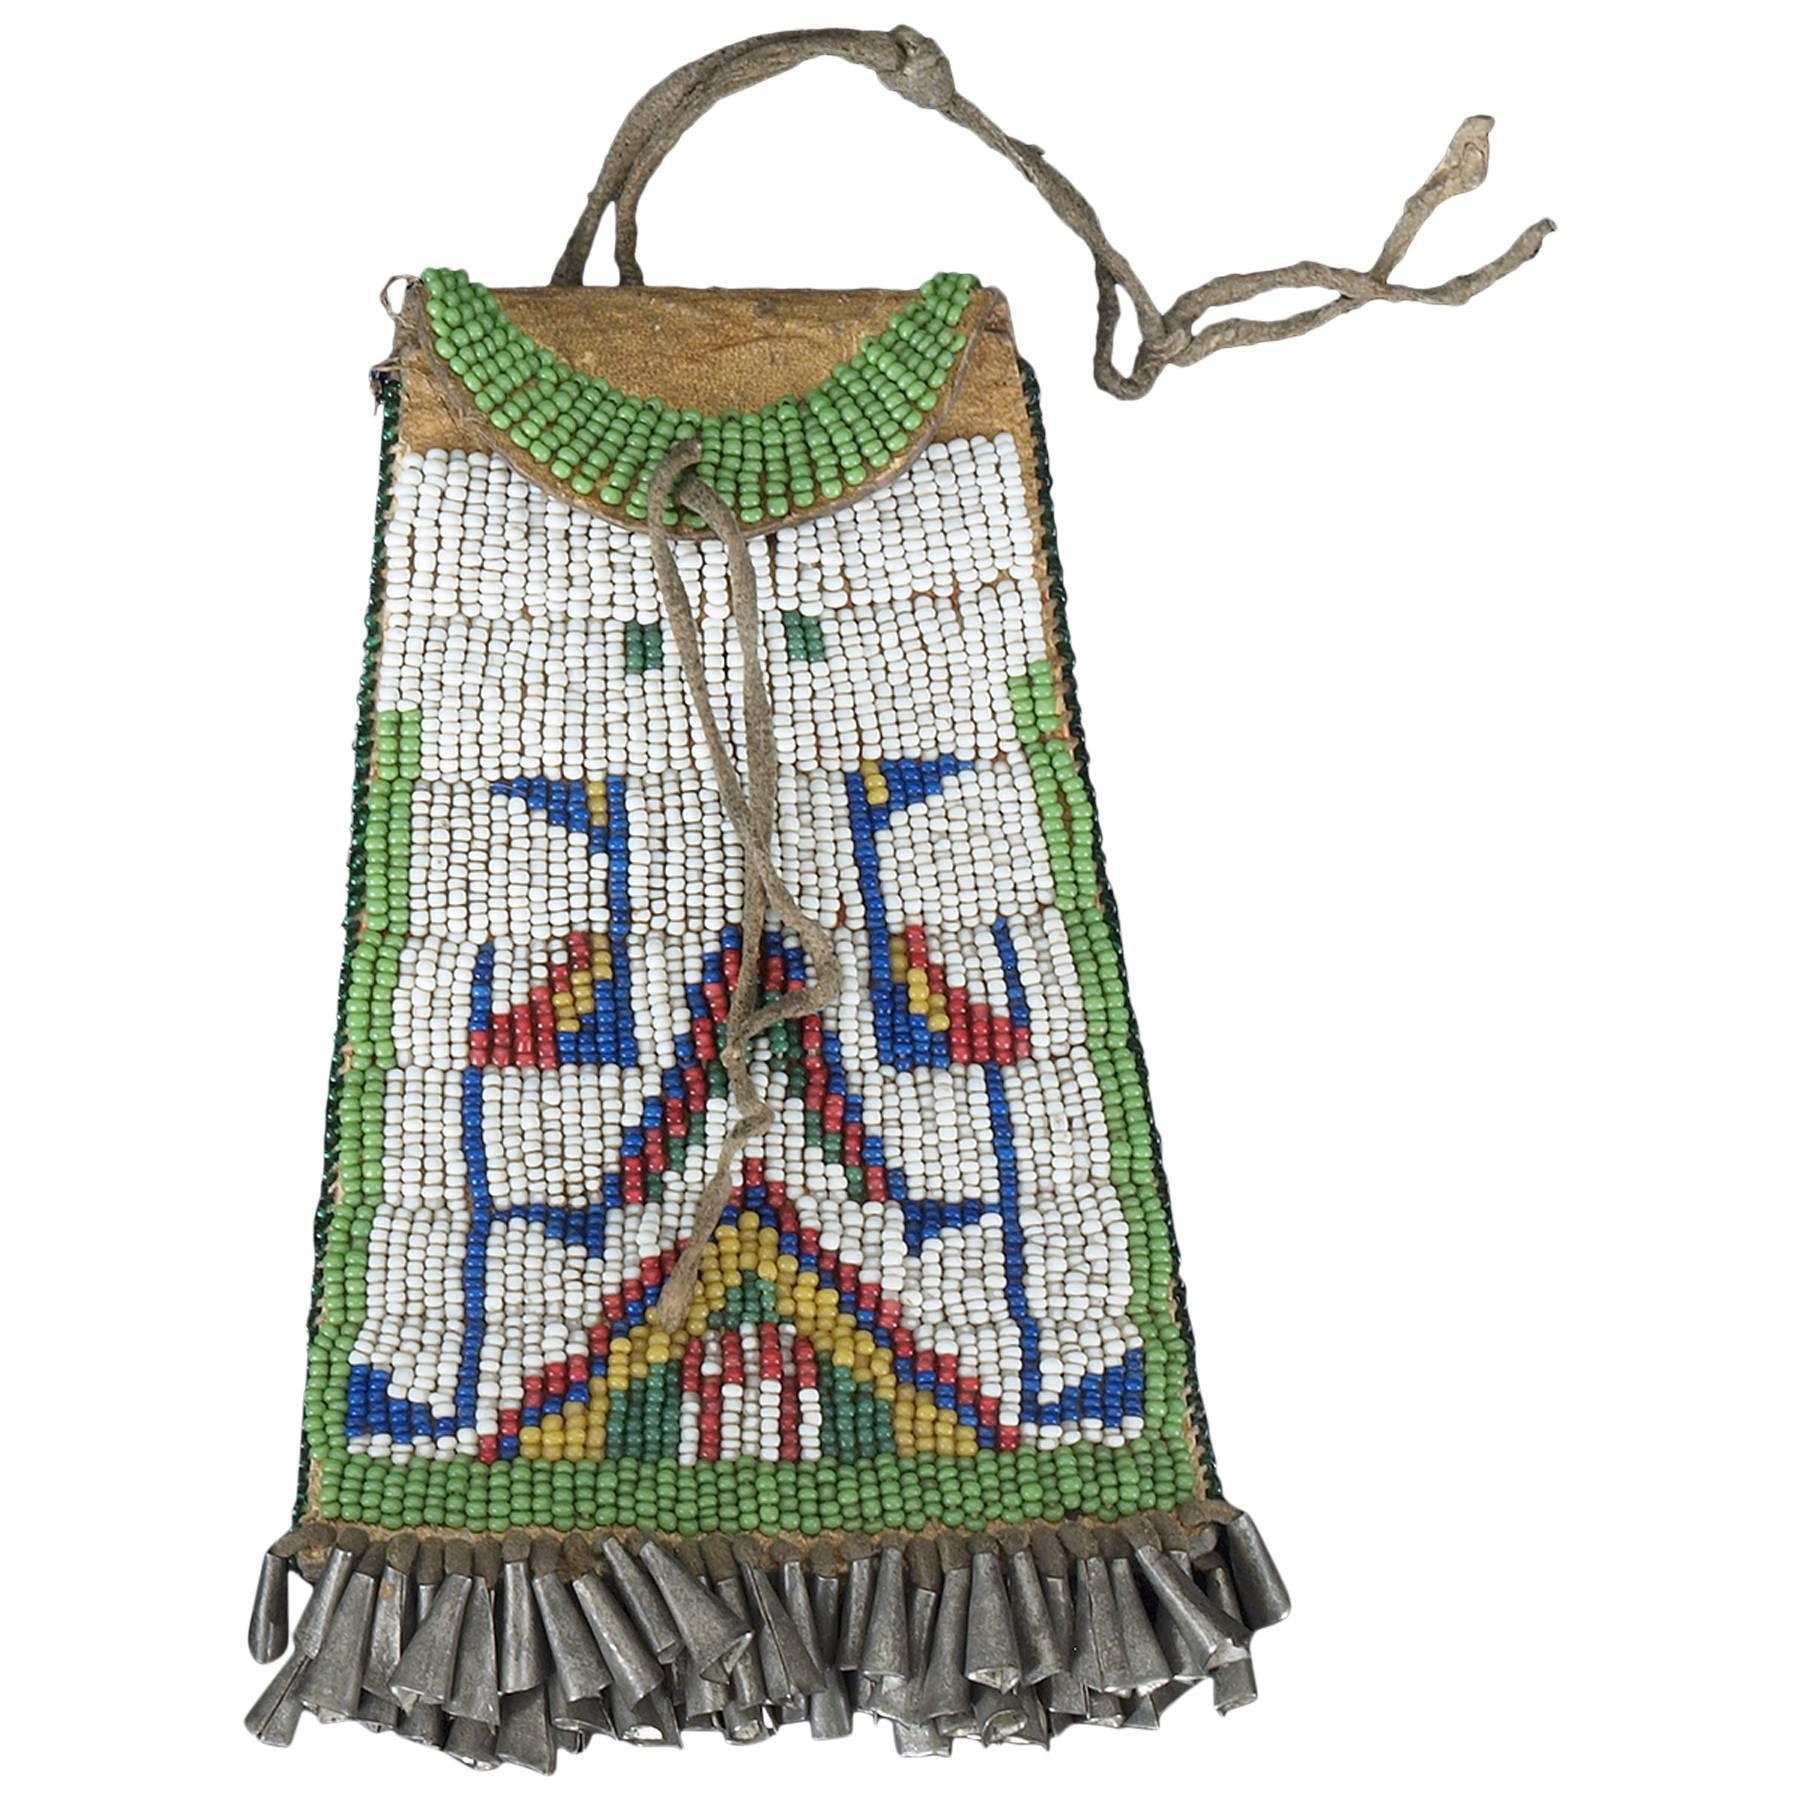 Antique Native American Beaded "Strike-A-Light" Bag, Sioux, 19th Century